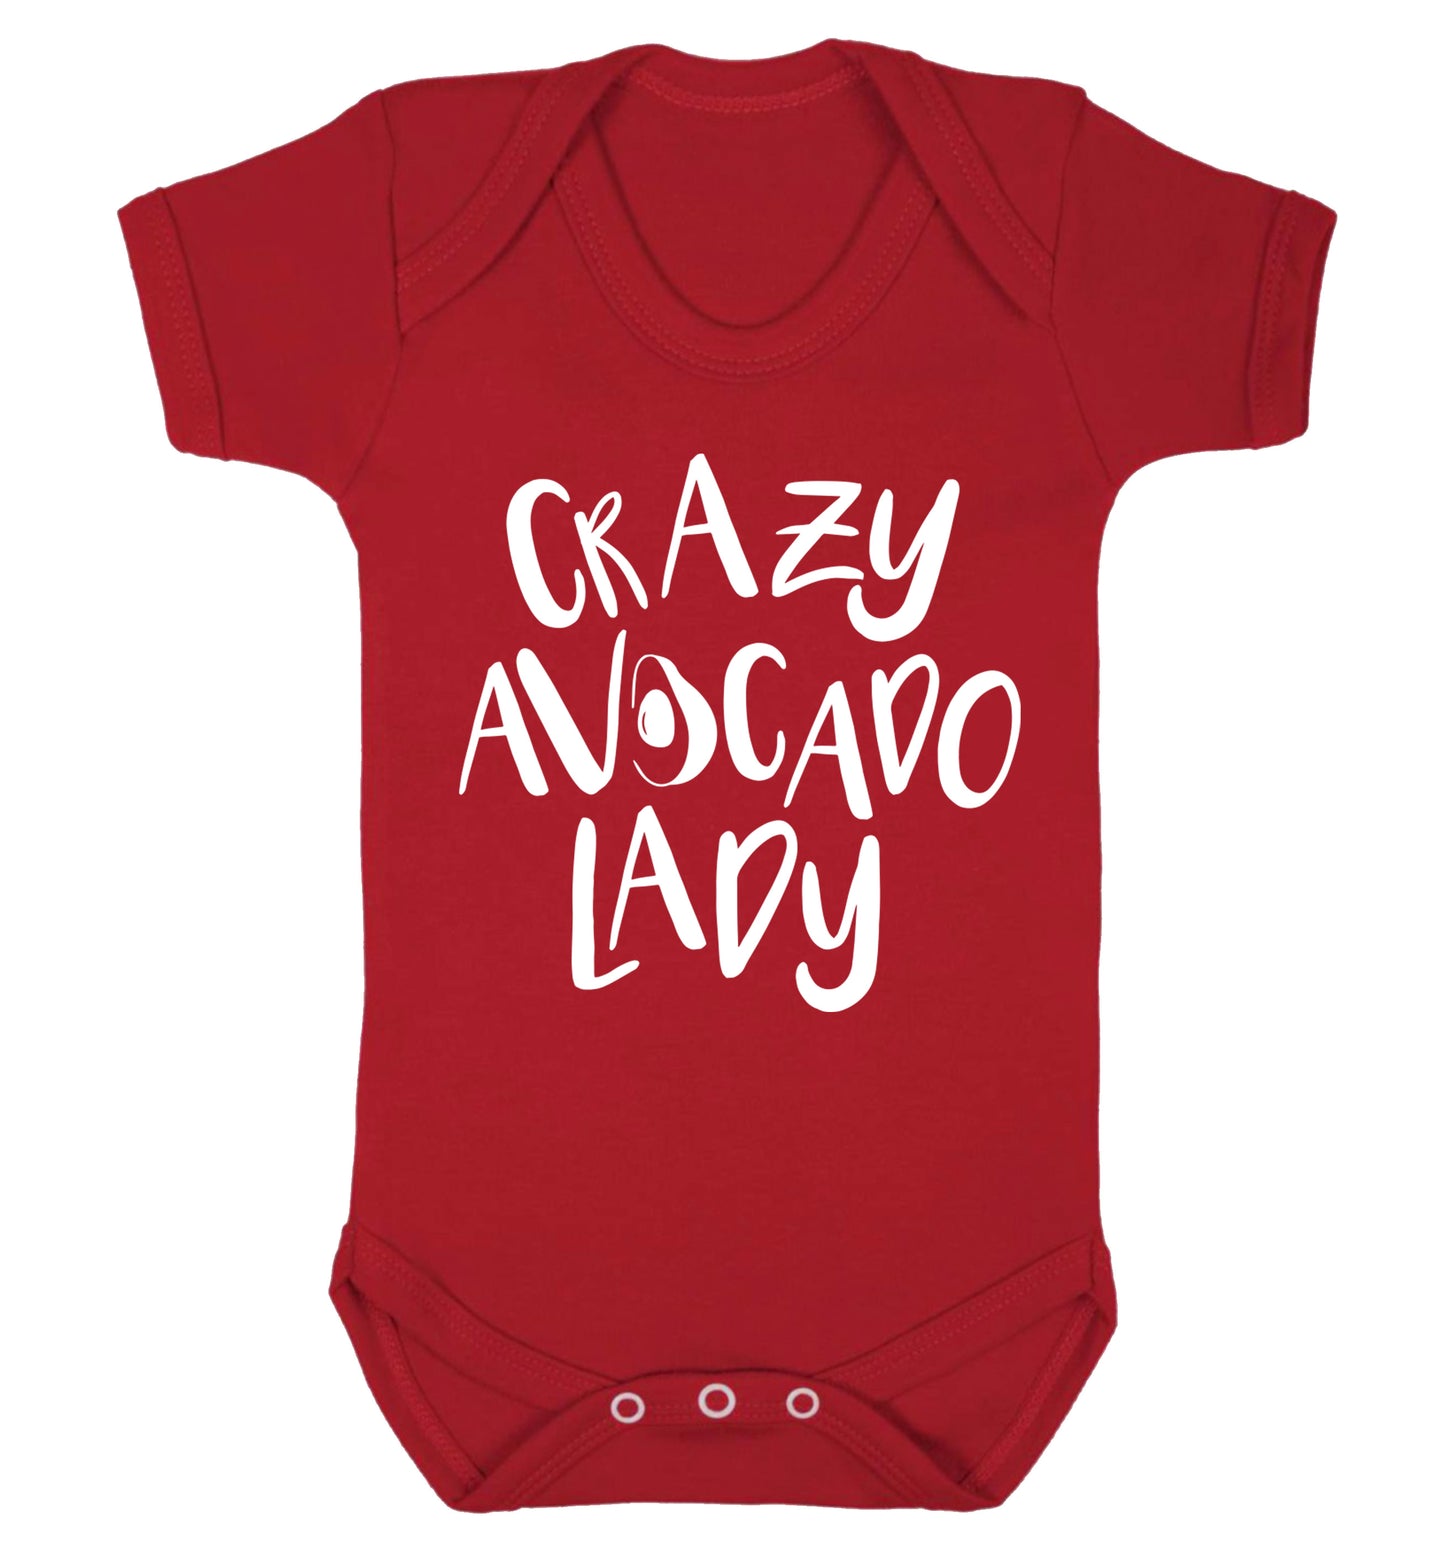 Crazy avocado lady Baby Vest red 18-24 months